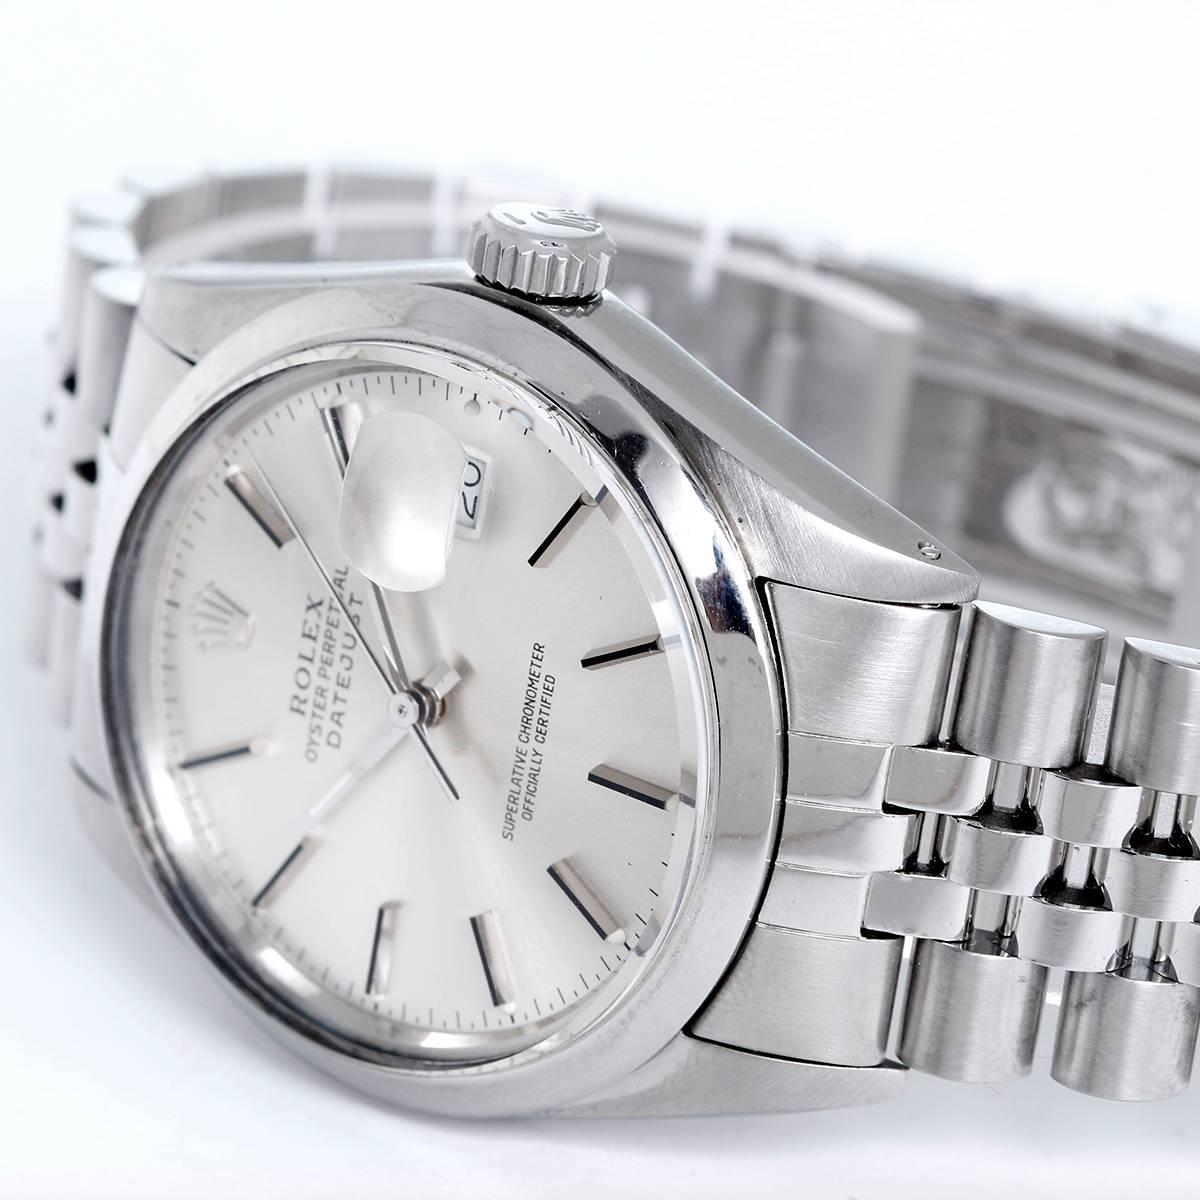 Automatic winding, 29 jewels, Acrylic crystal. Stainless steel case with smooth bezel (36mm diameter). Silver dial with stick markers. Stainless steel Jubilee bracelet. Pre-owned with box and book. Retail Price: $5,400.00